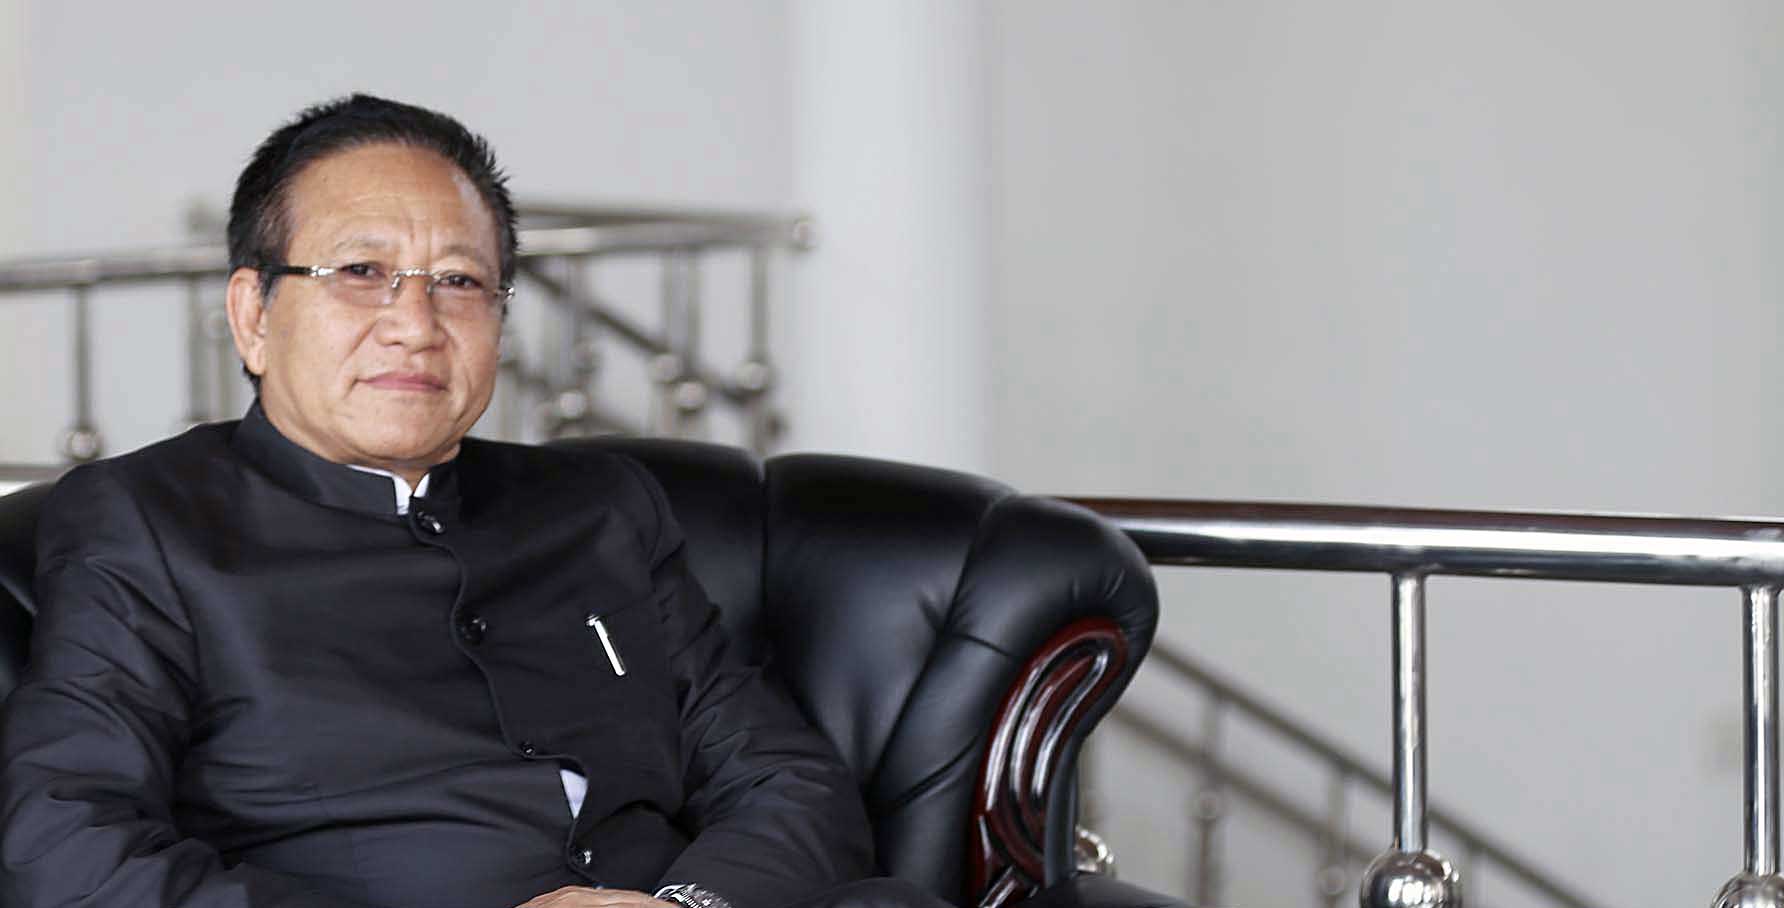 tr zeliang nagaland cheif minister